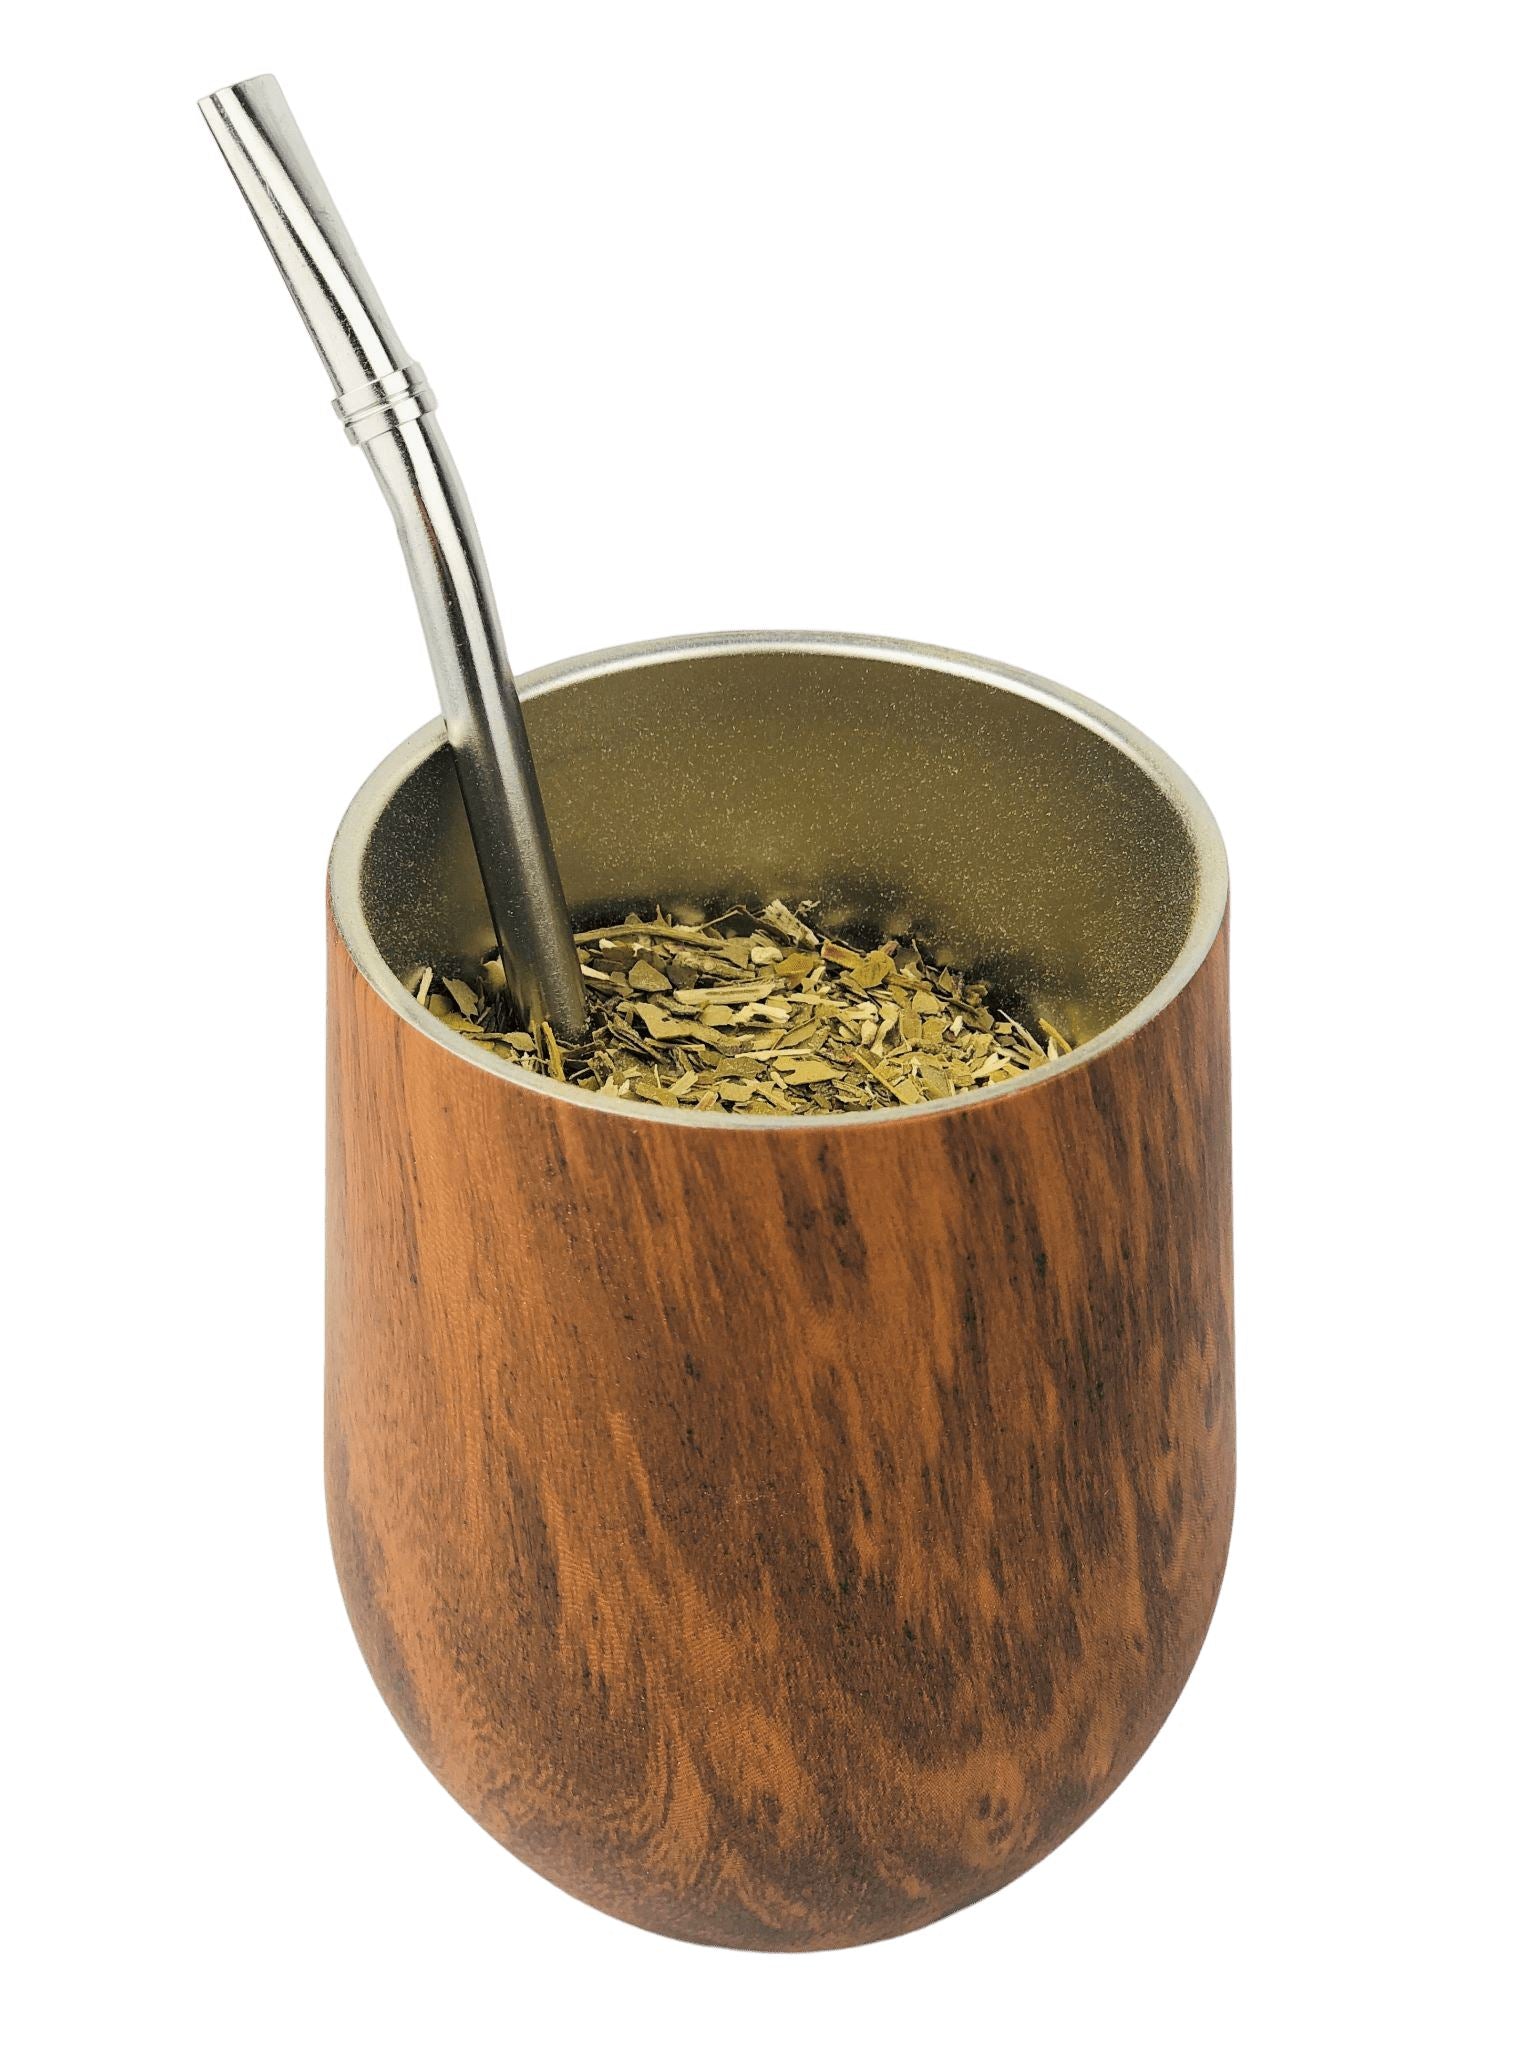 Premium Photo  Sharing yerba mate tea in wooden mate cup with bombilla  metal straw serving as a tea